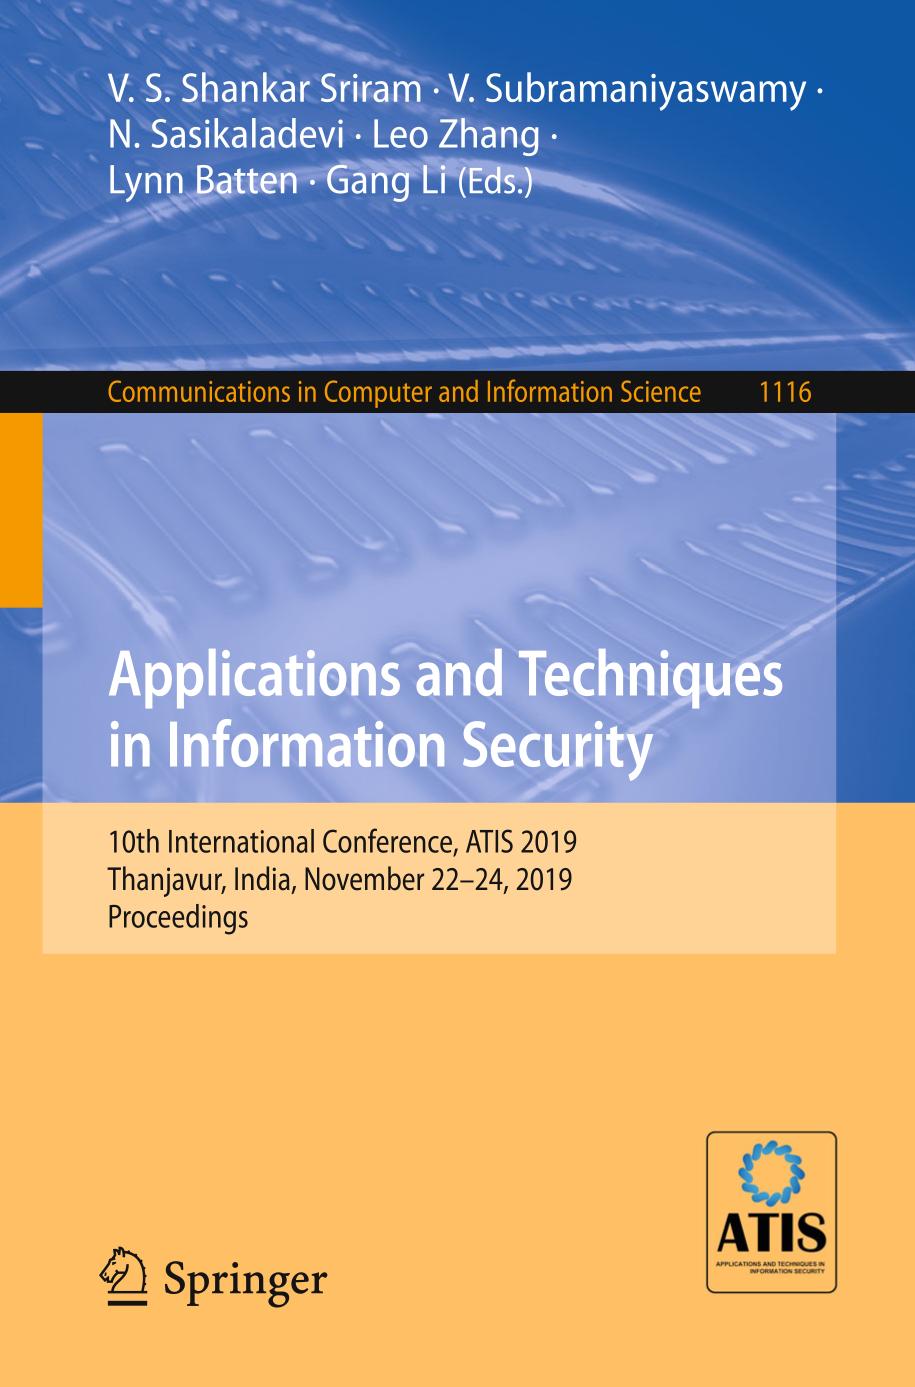 Applications and techniques in information security : 10th International conference, ATIS 2019 Thanjavur, India, November 22-24, 2019 : proceedings